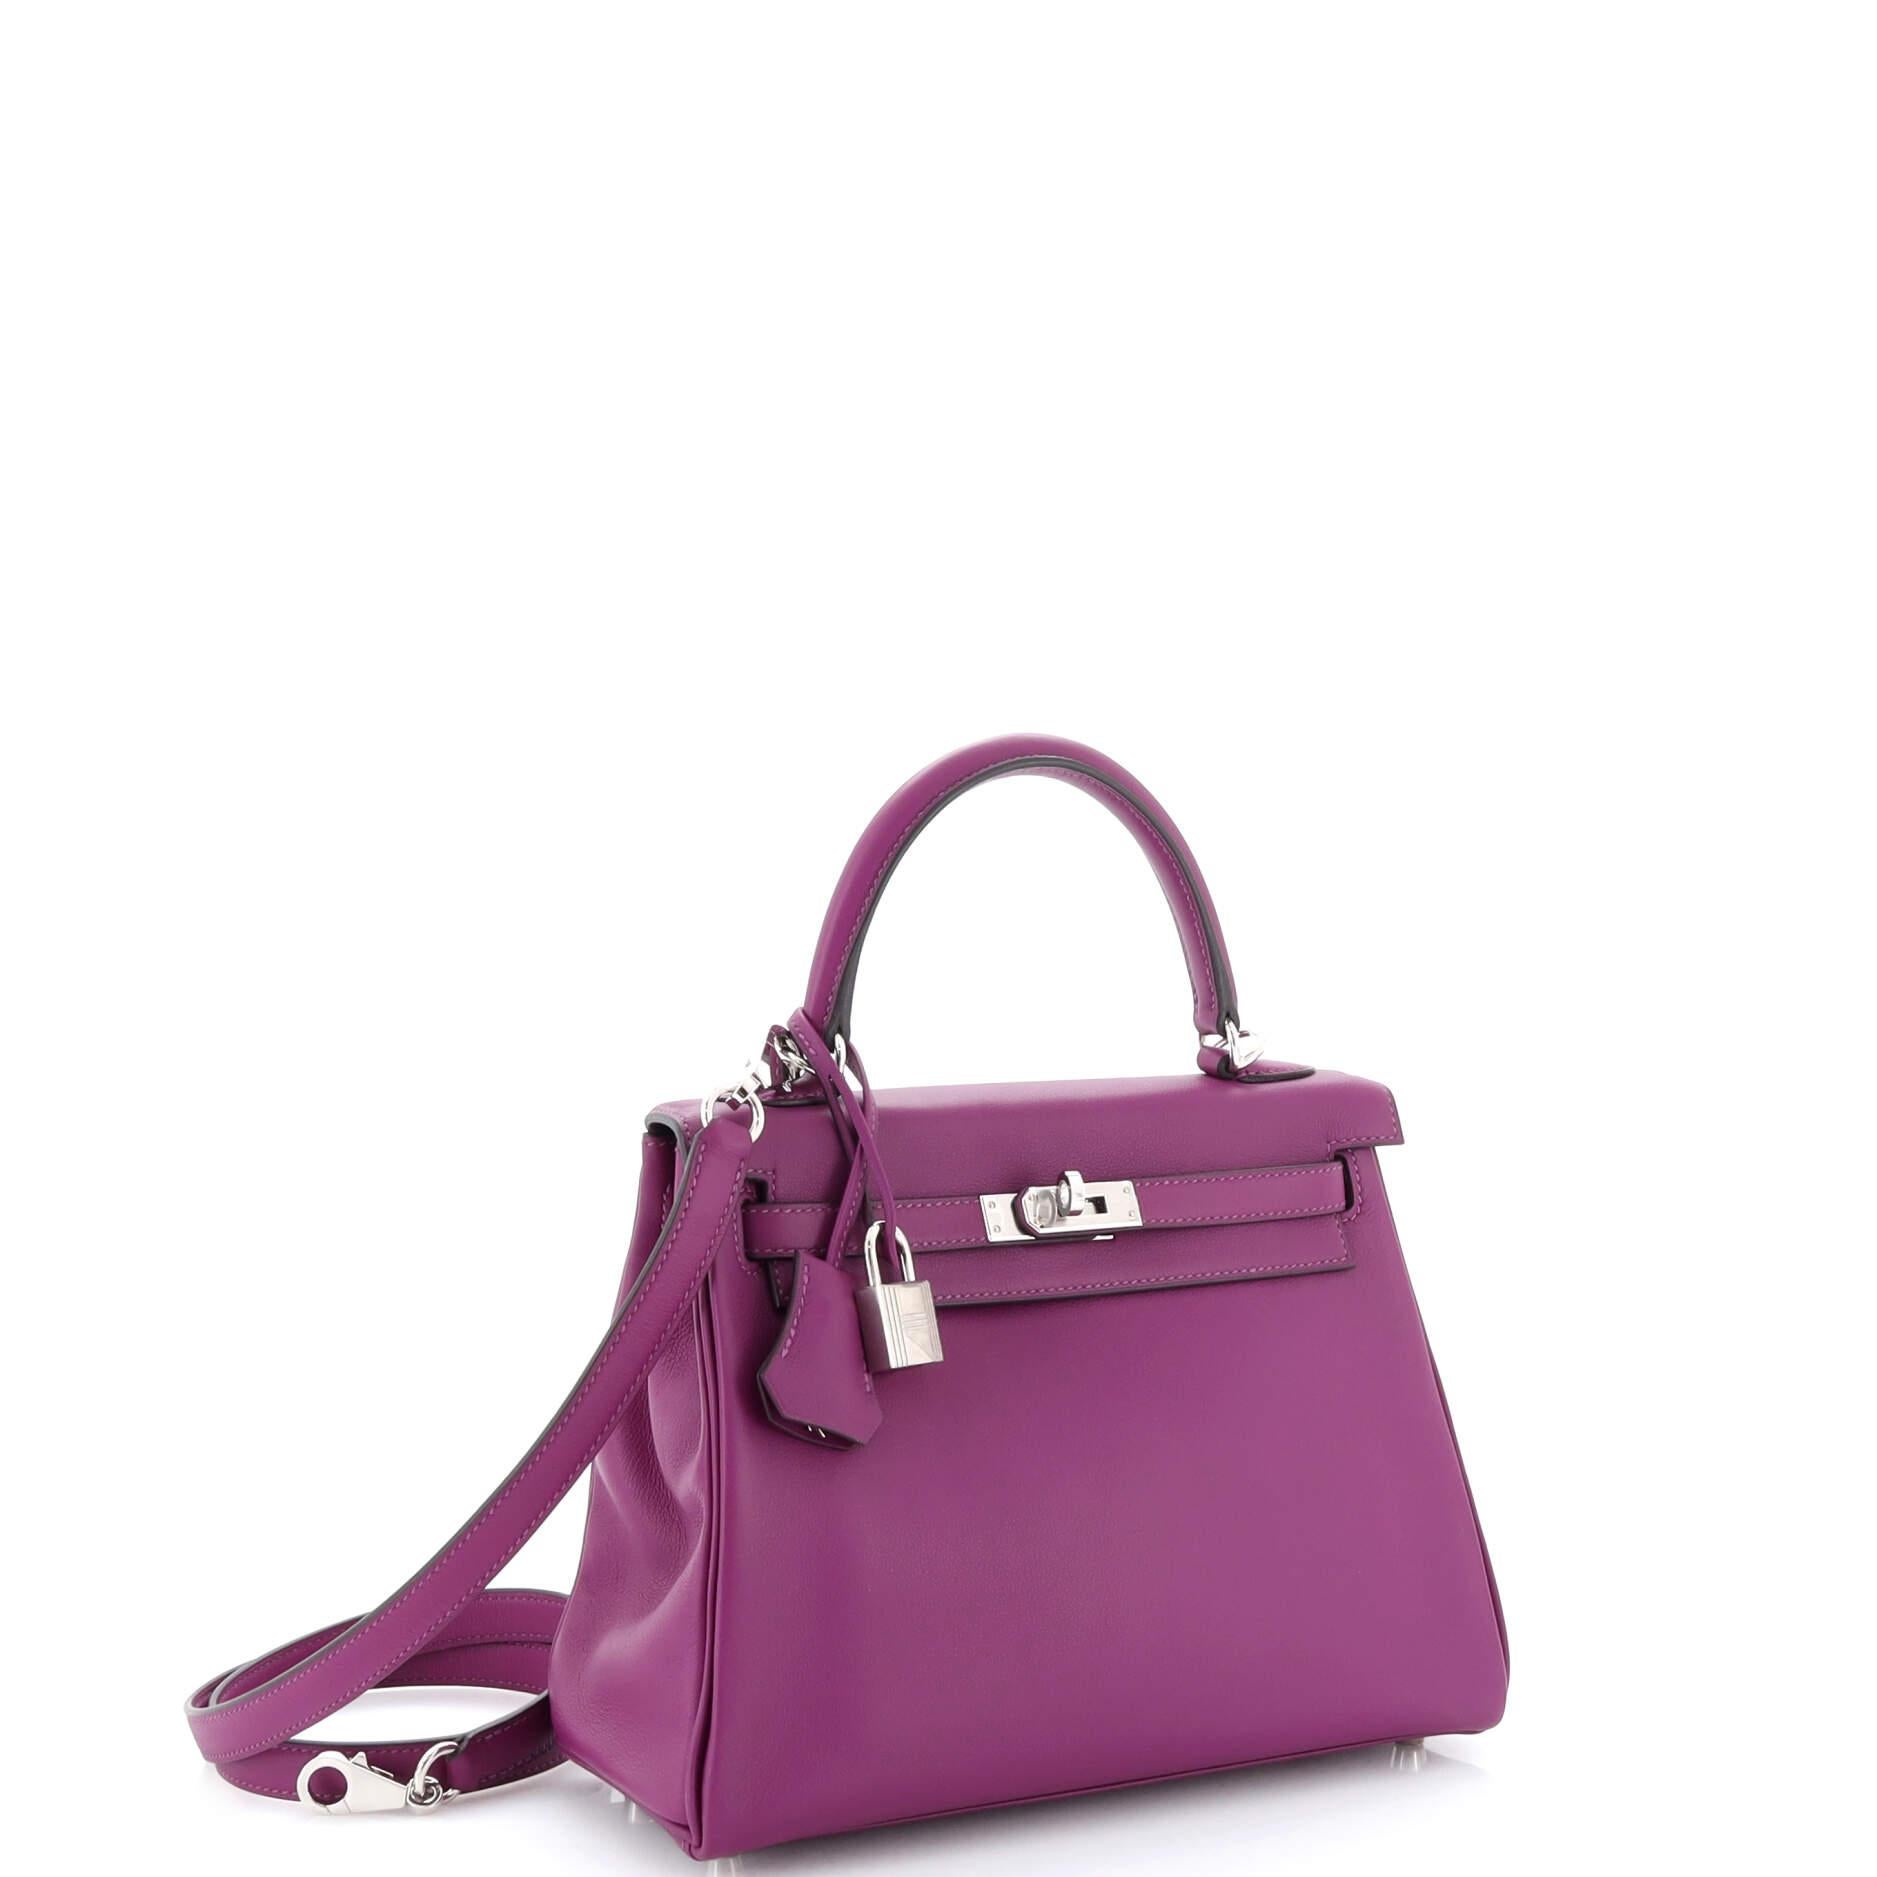 Hermes Kelly Handbag Anemone Swift with Palladium Hardware 25 In Good Condition For Sale In NY, NY